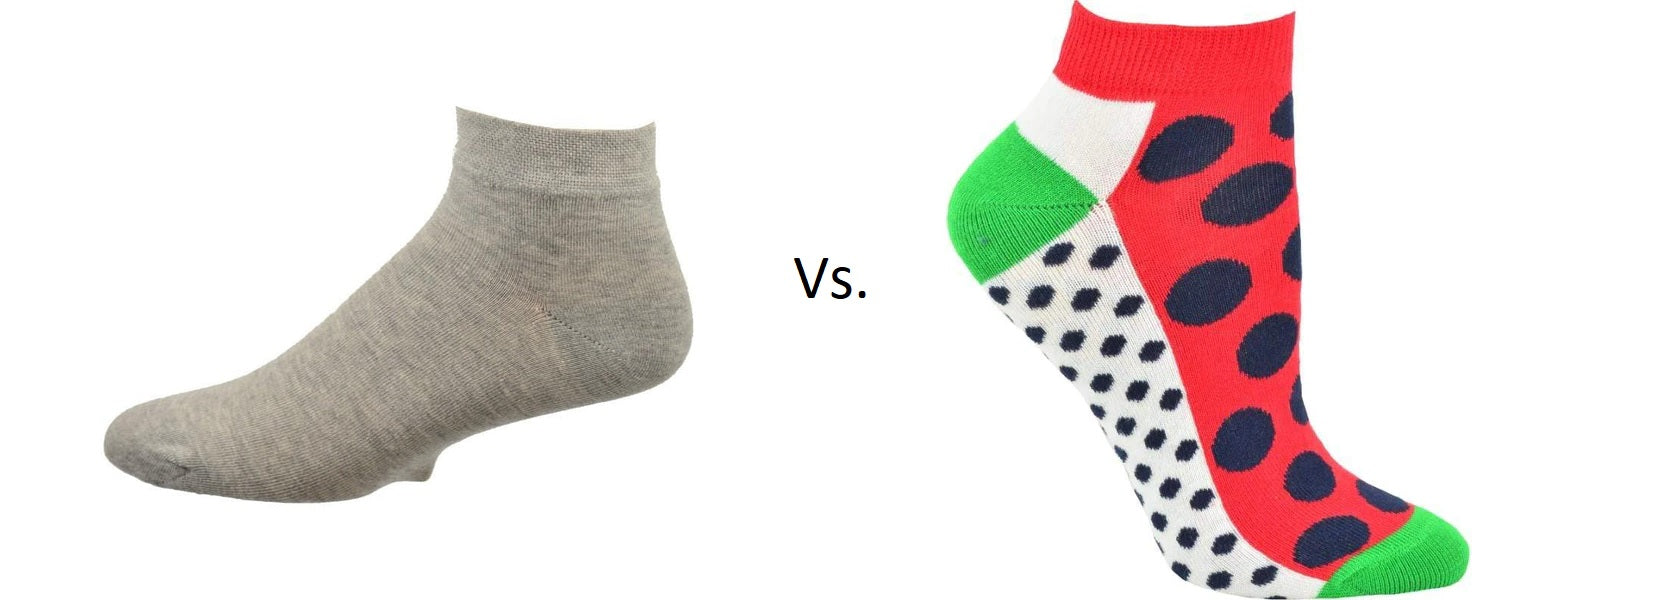 What Is The Difference Between Sport Socks And Normal Socks?